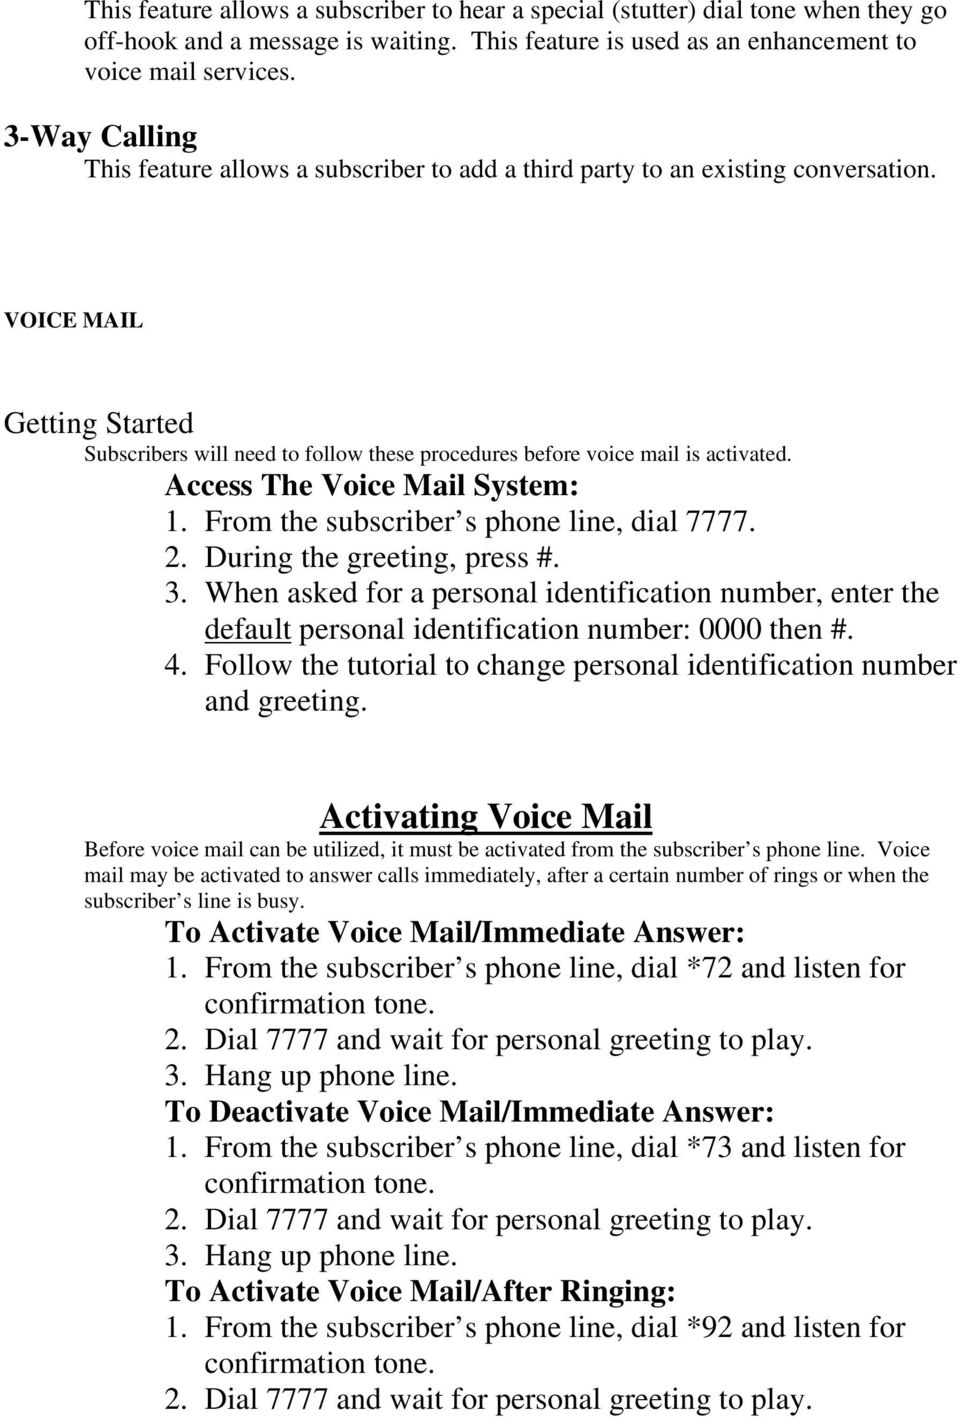 VOICE MAIL Getting Started Subscribers will need to follow these procedures before voice mail is activated. Access The Voice Mail System: 1. From the subscriber s phone line, dial 7777. 2.